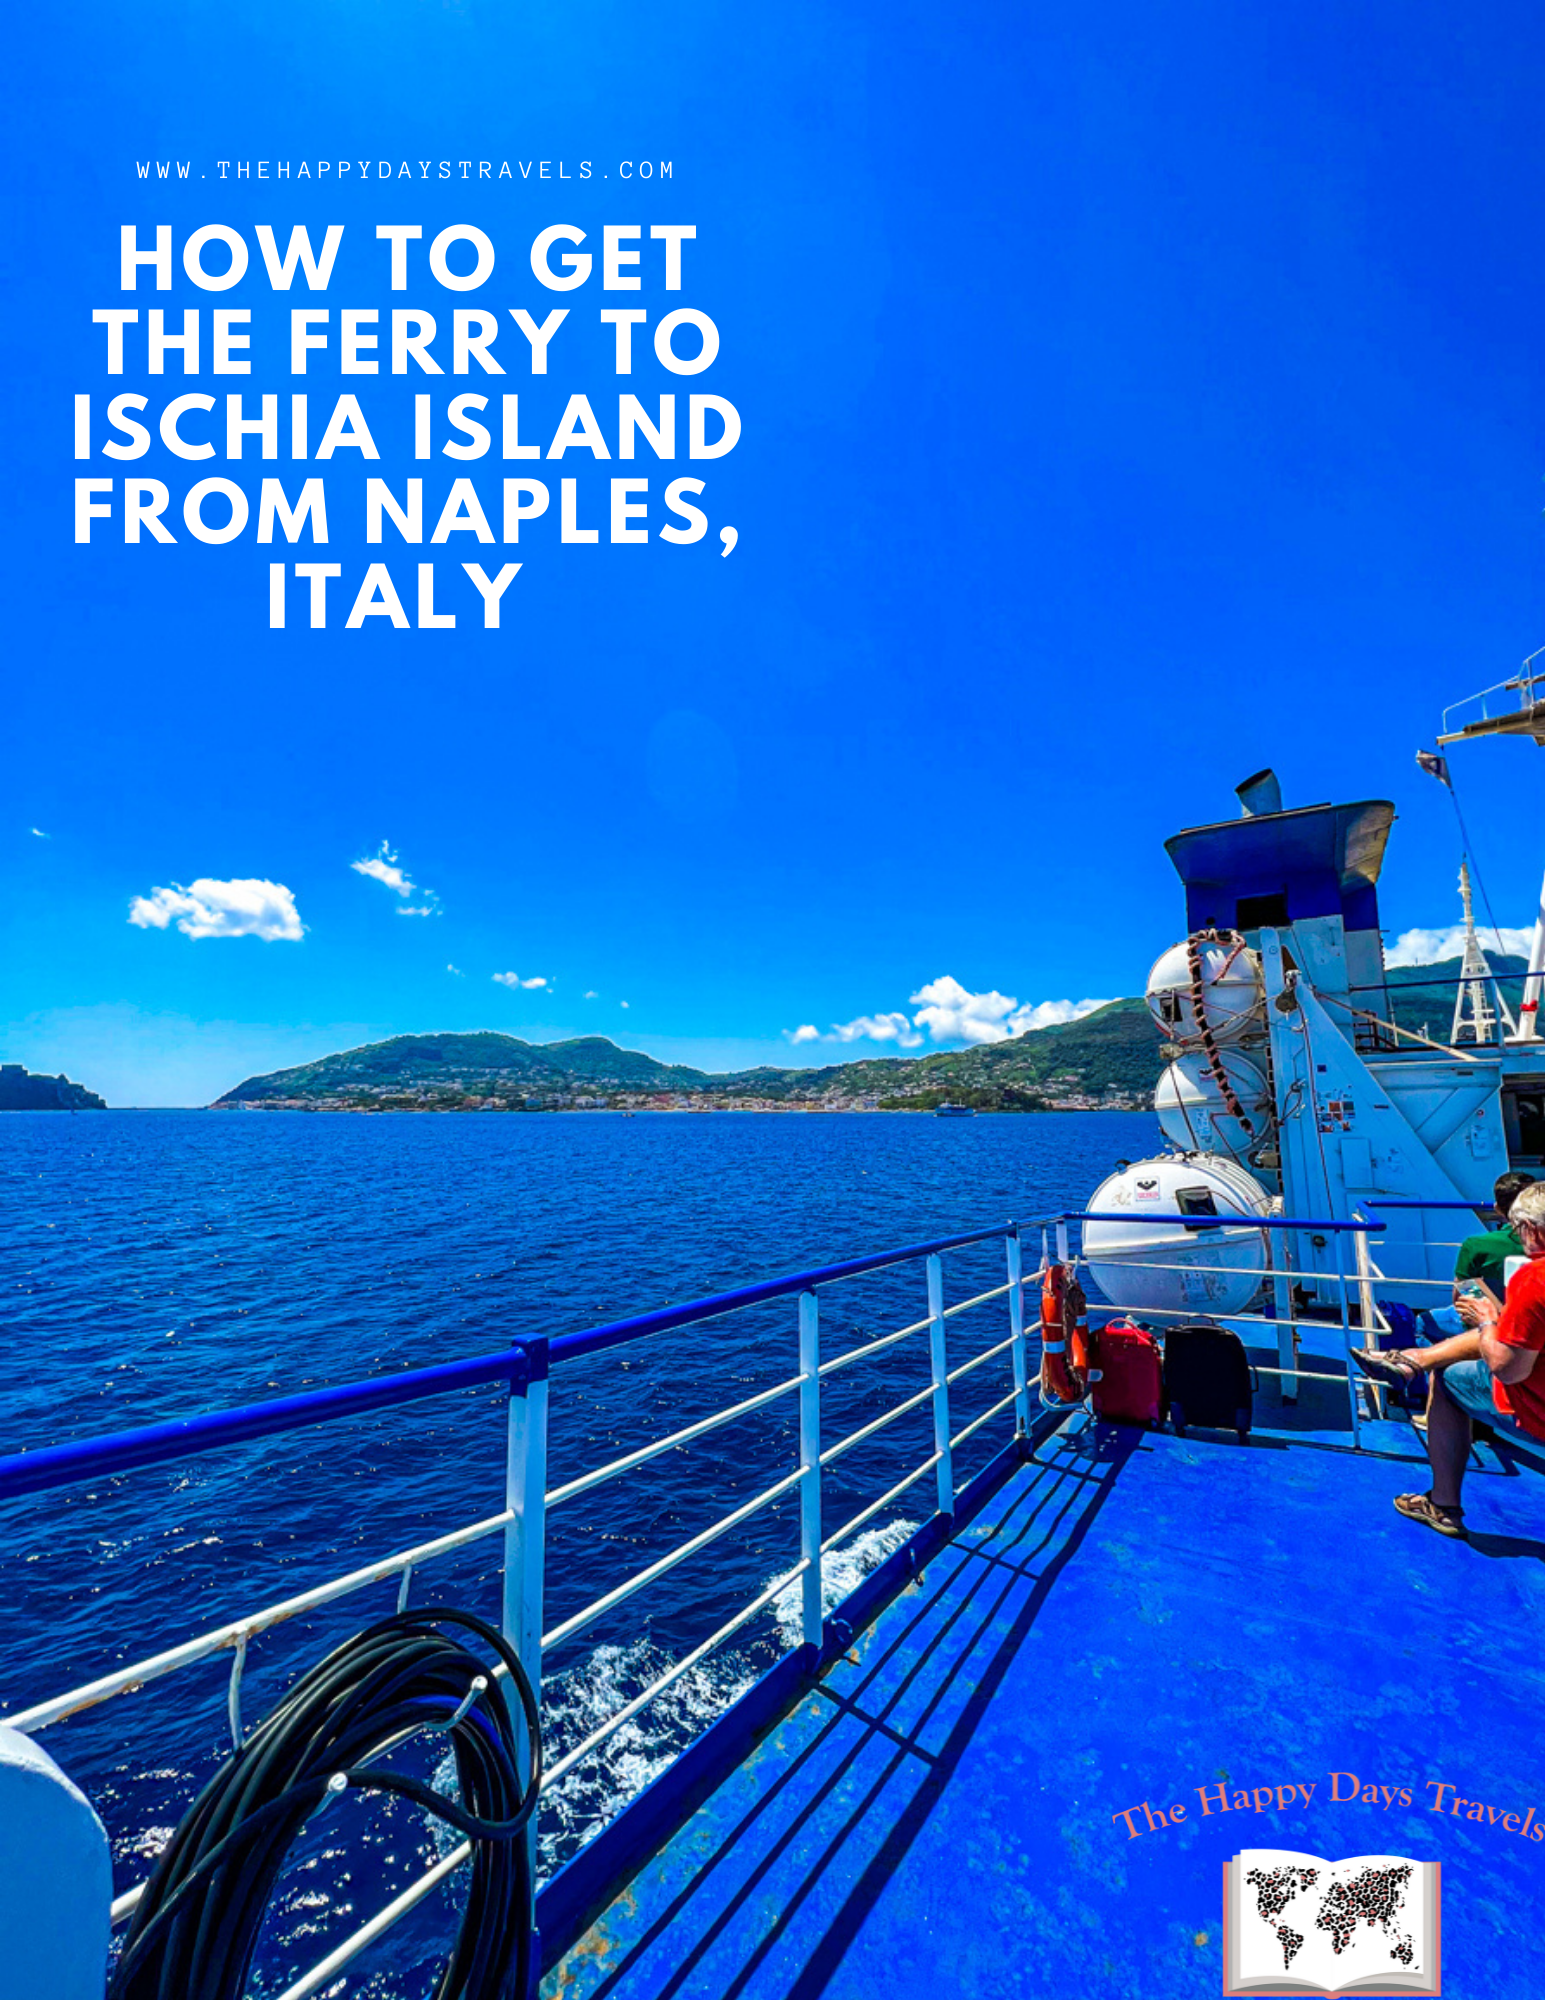 Pin image of the Caremar ferry from Naples to ischia in Italy. Text reads 'how to get the ferry to ischia island from Naples, Italy' with The Happy Days Travels logo in bottom right corner.